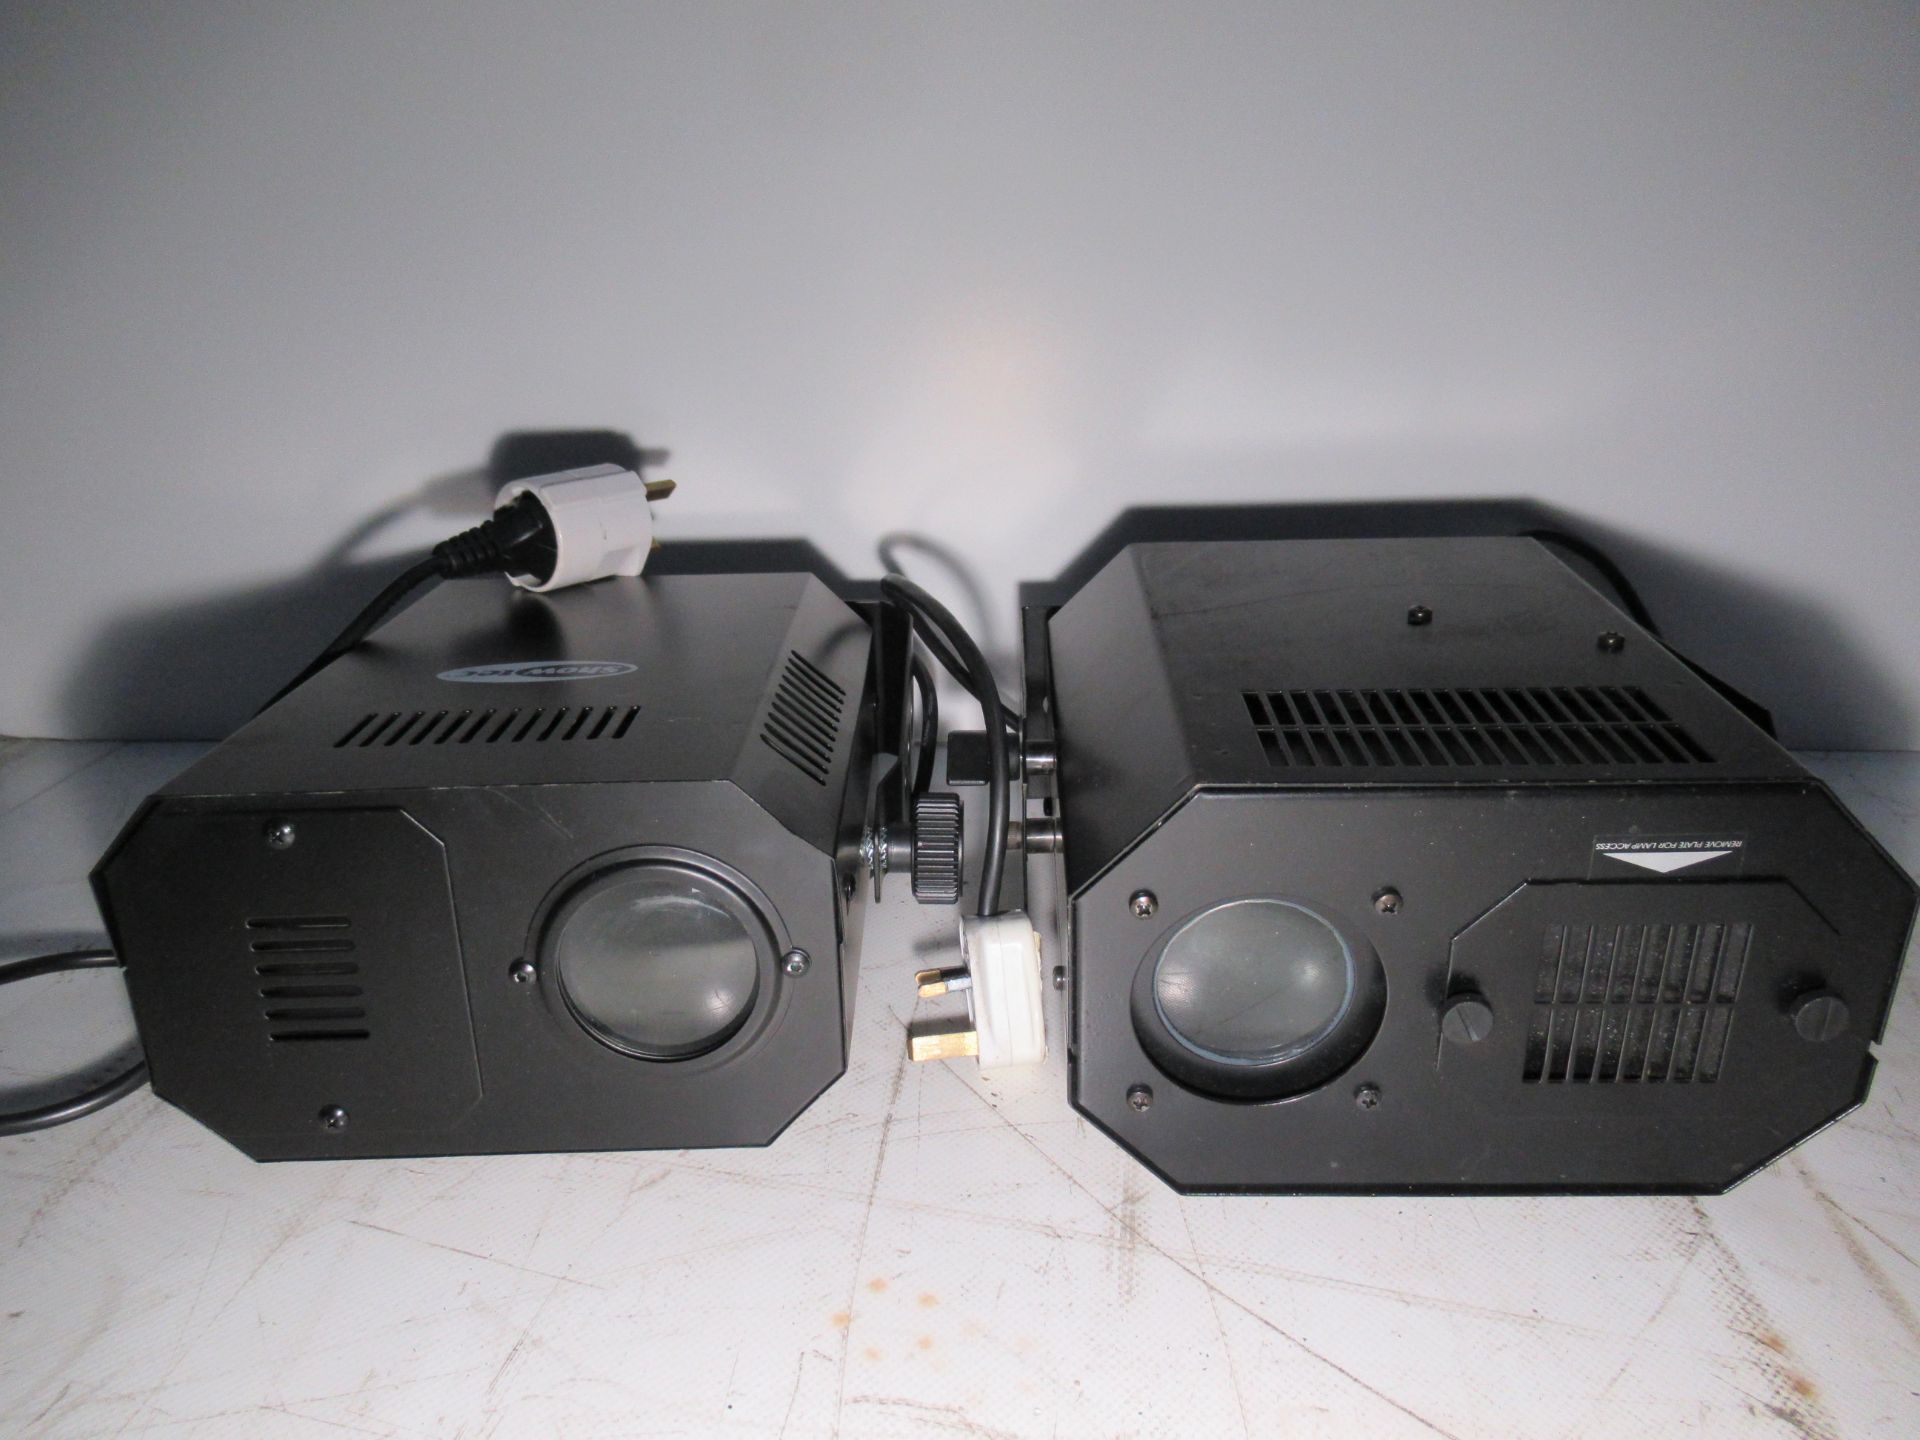 2 x Showtech Orion Lighting Effects in Flight Cases